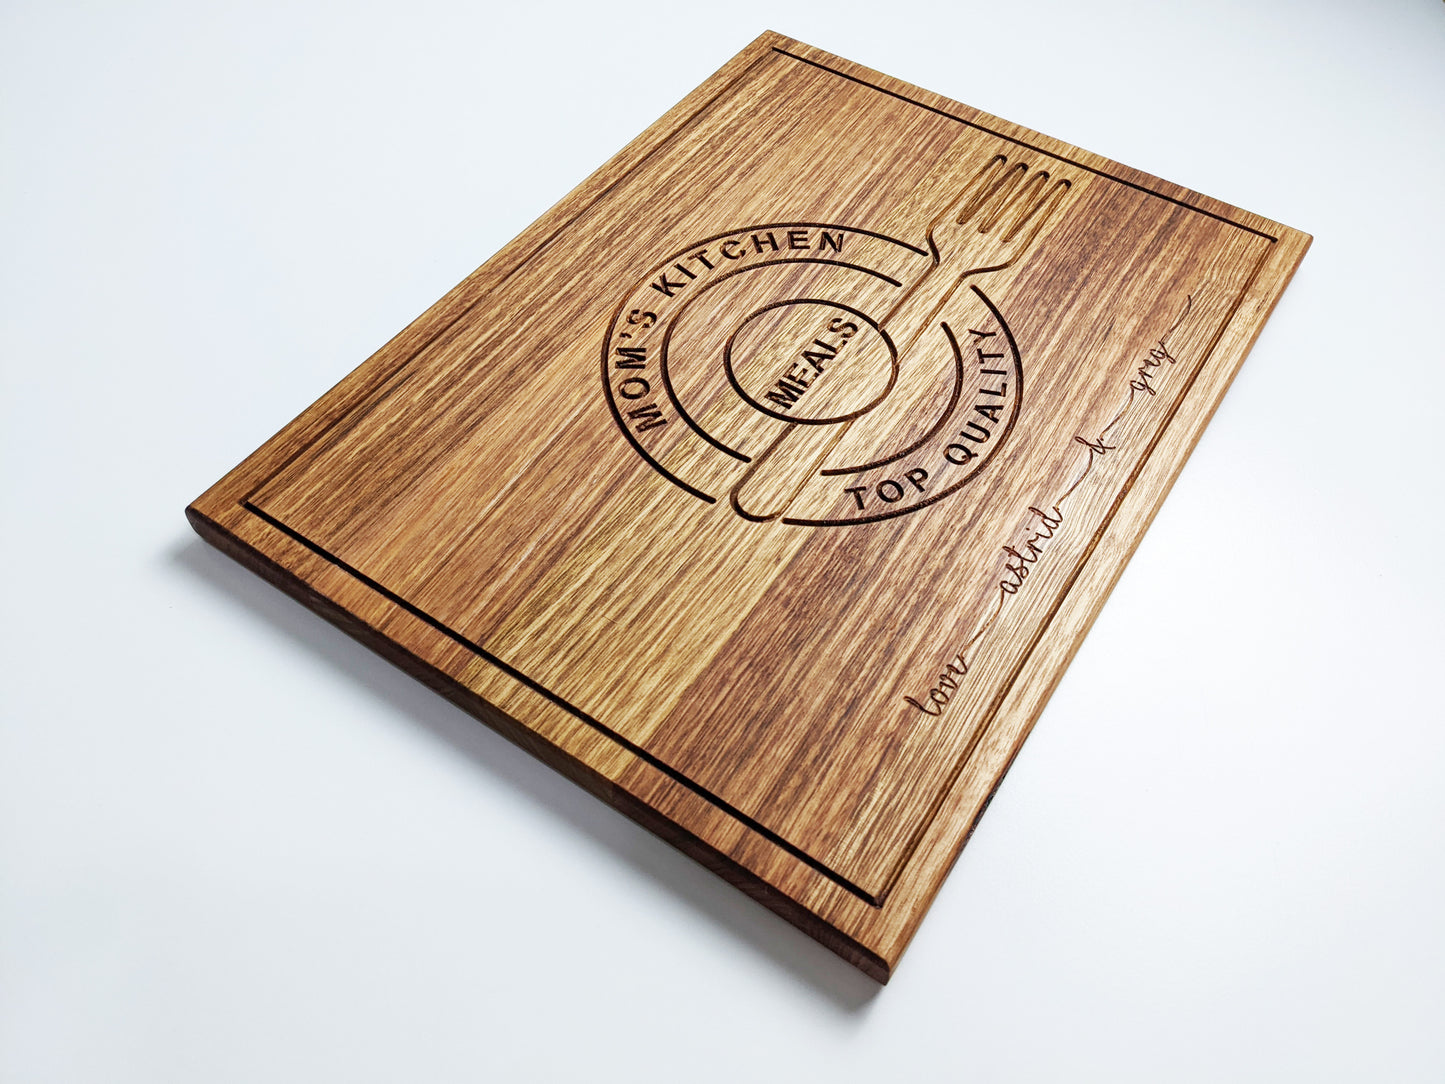 Mother’s Day Cutting Boards